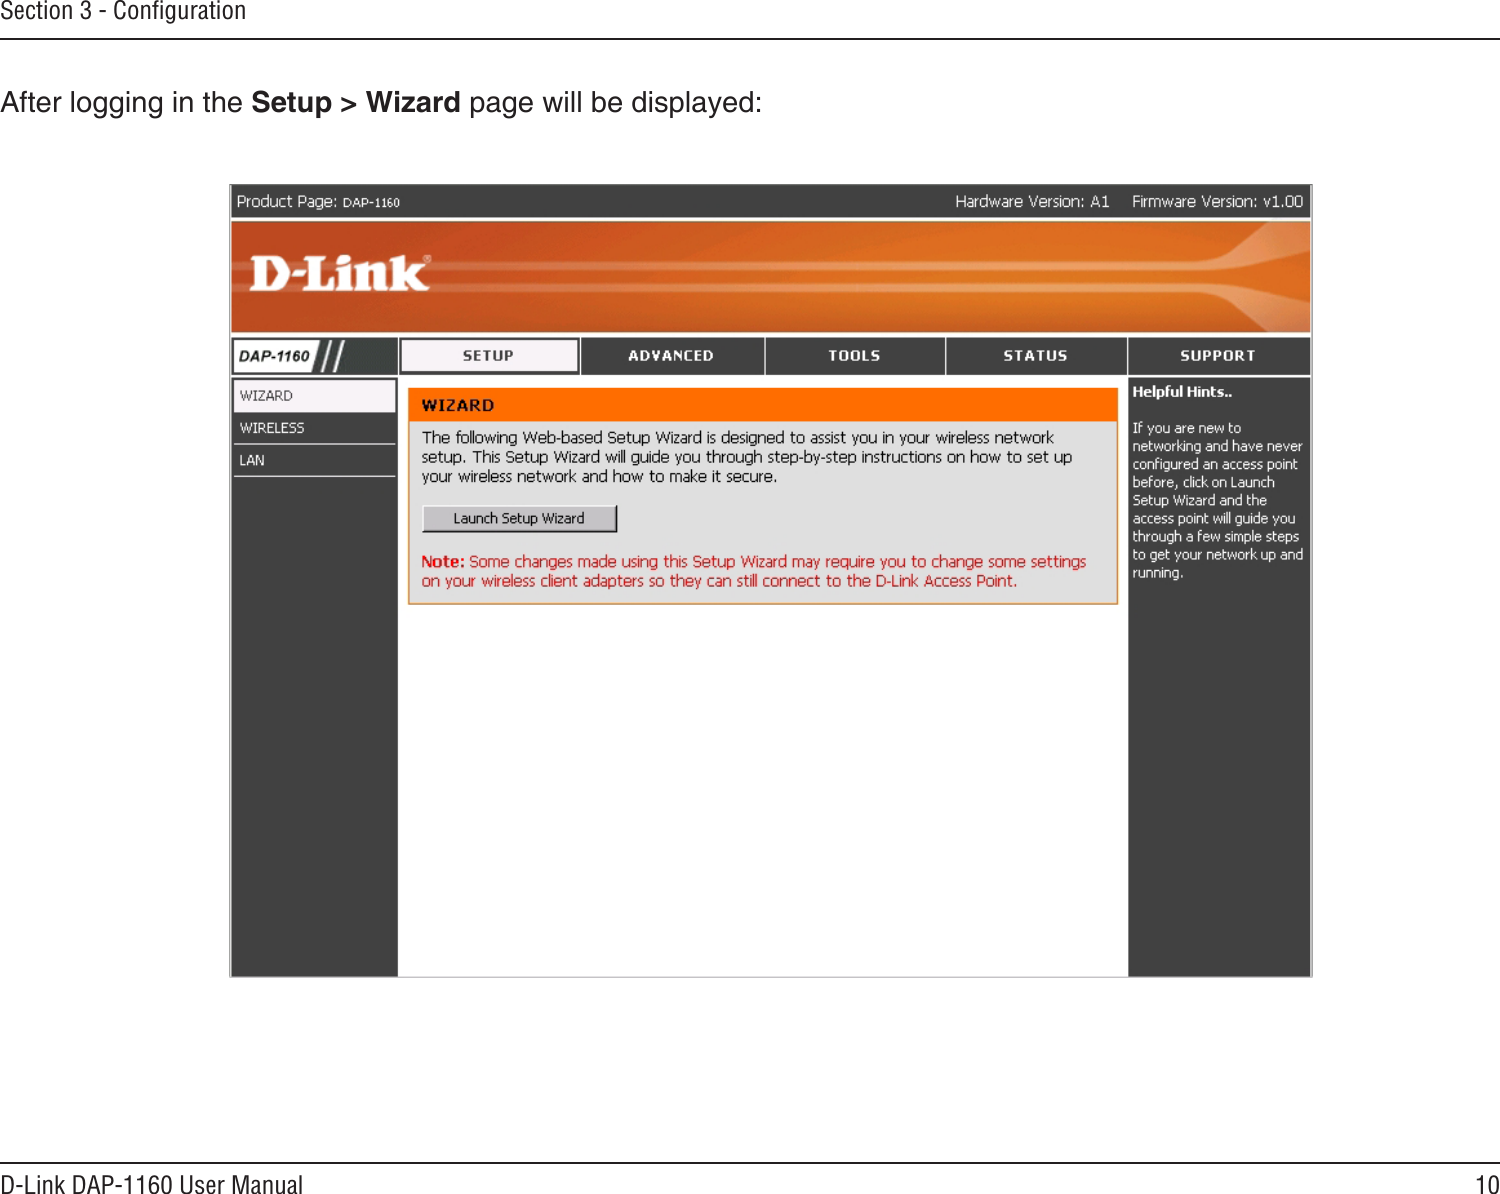 10D-Link DAP-1160 User ManualSection 3 - ConﬁgurationAfter logging in the Setup &gt; Wizard page will be displayed: